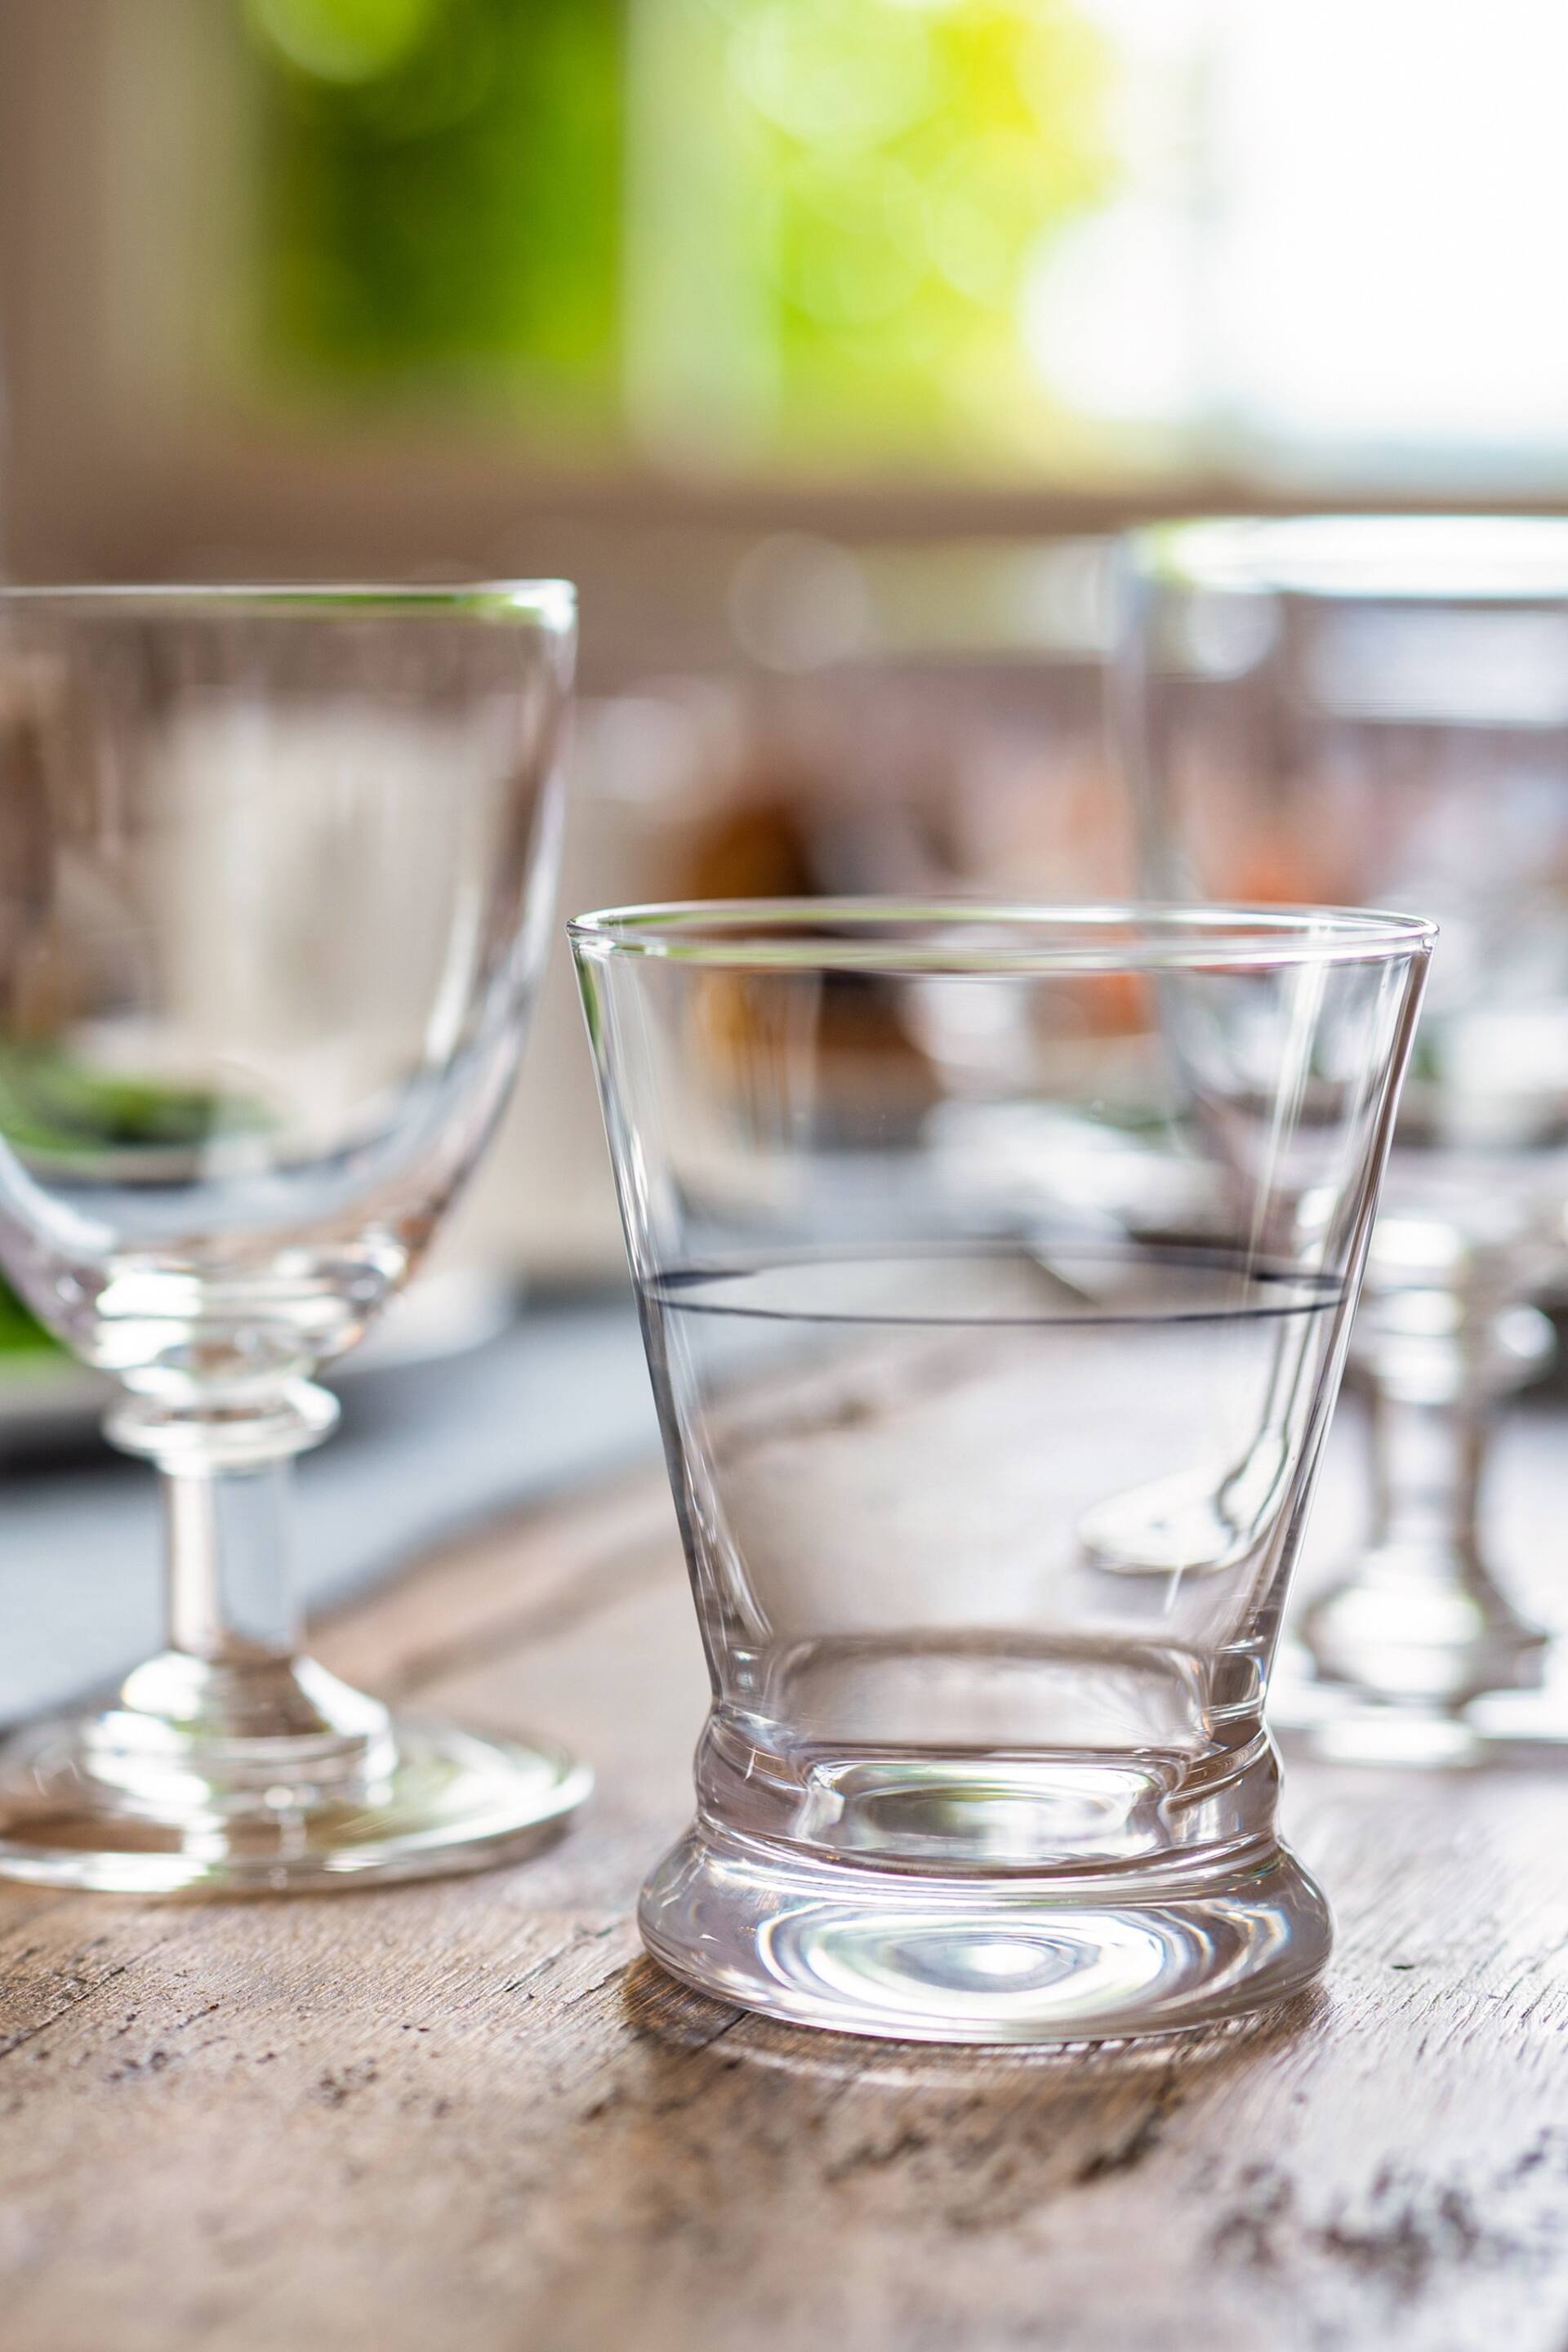 Mary Berry Set of 4 Clear Signature Tumbler Glasses - Image 1 of 4